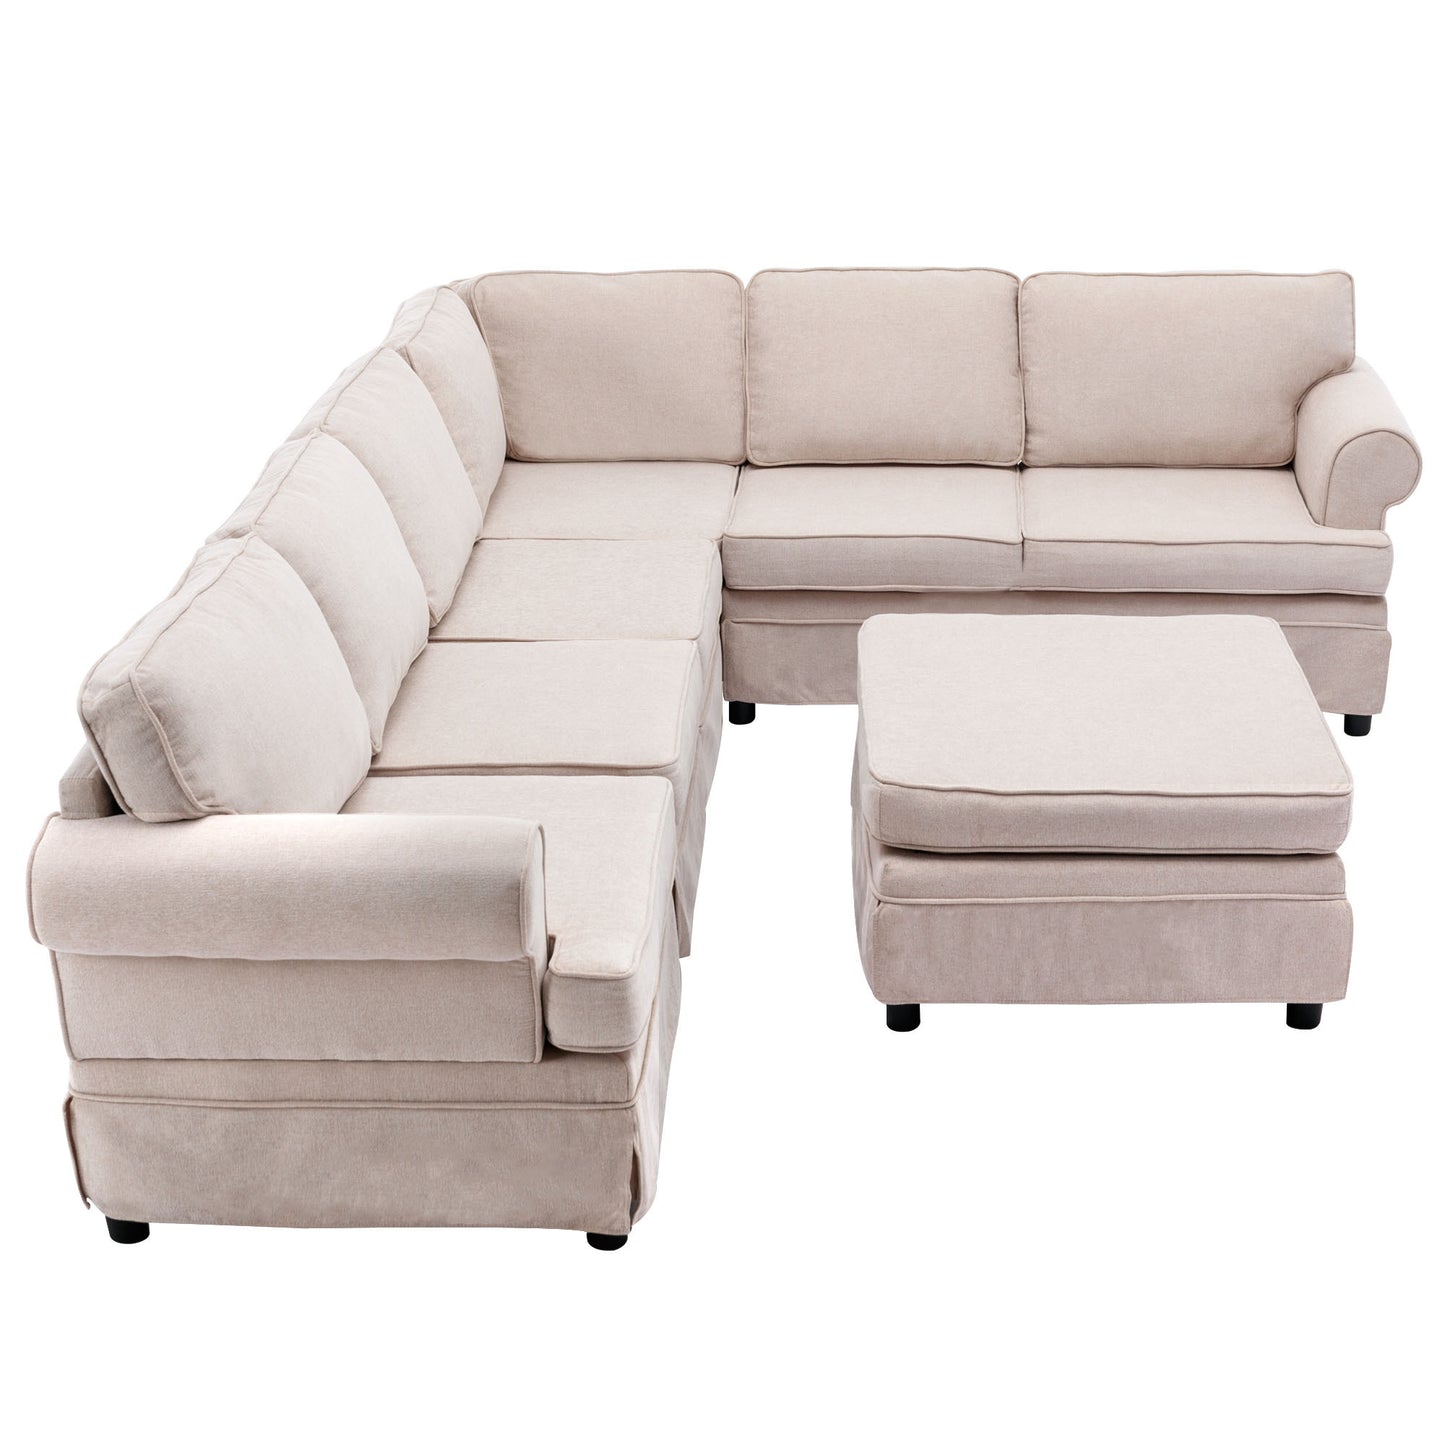 Modular Beige Sectional Sofa Collection with Removable Ottoman